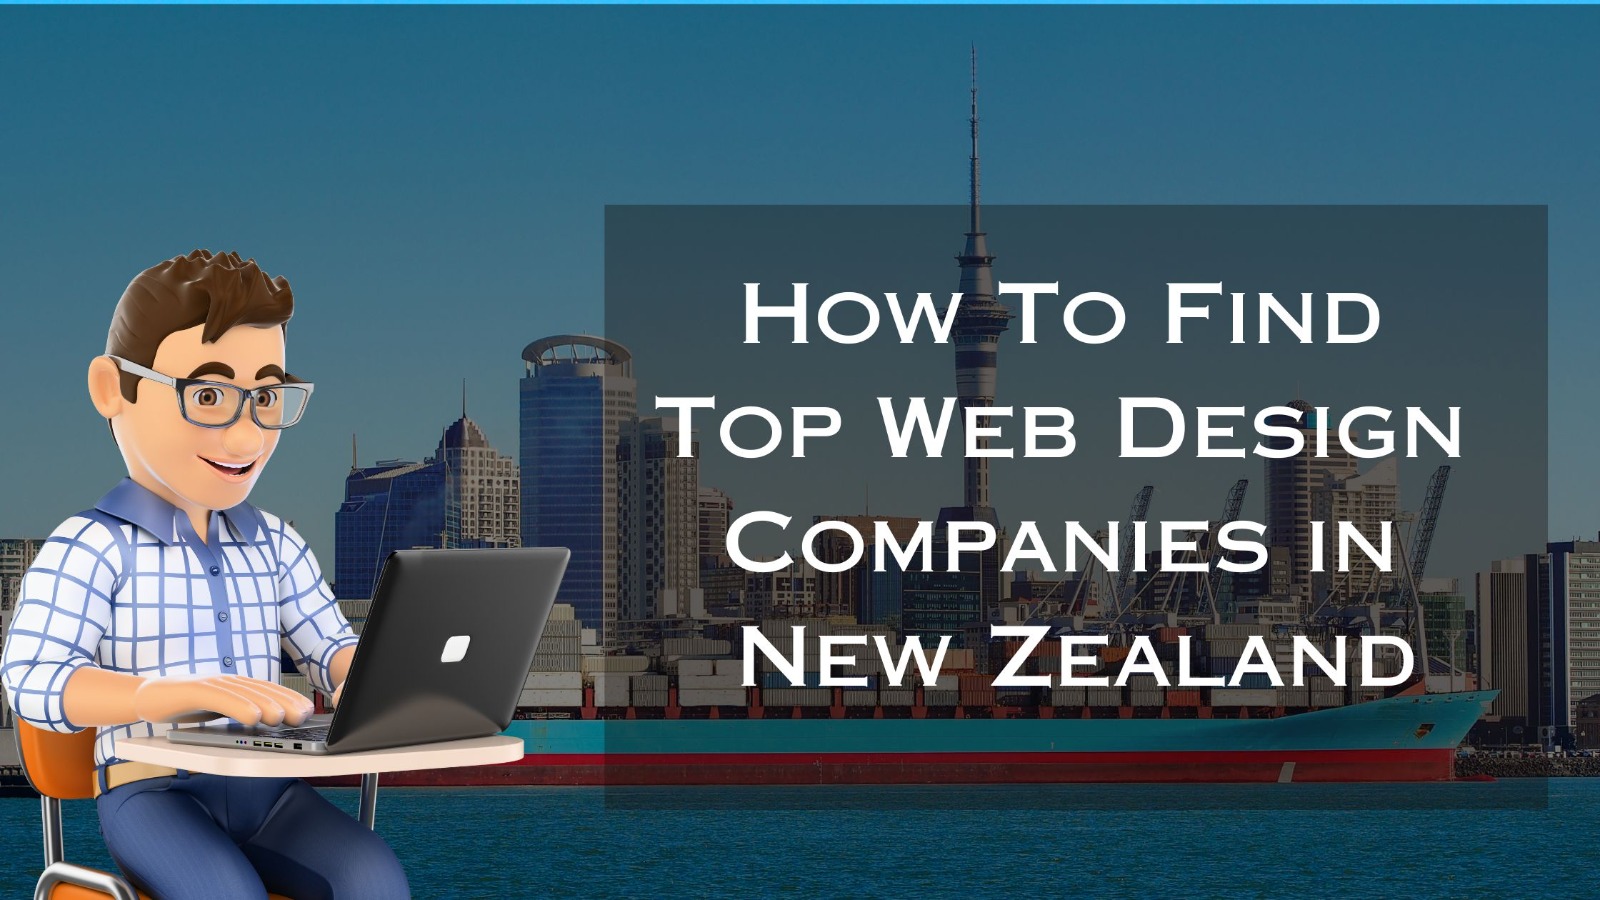 How To Find Top Web Design Companies in New Zealand